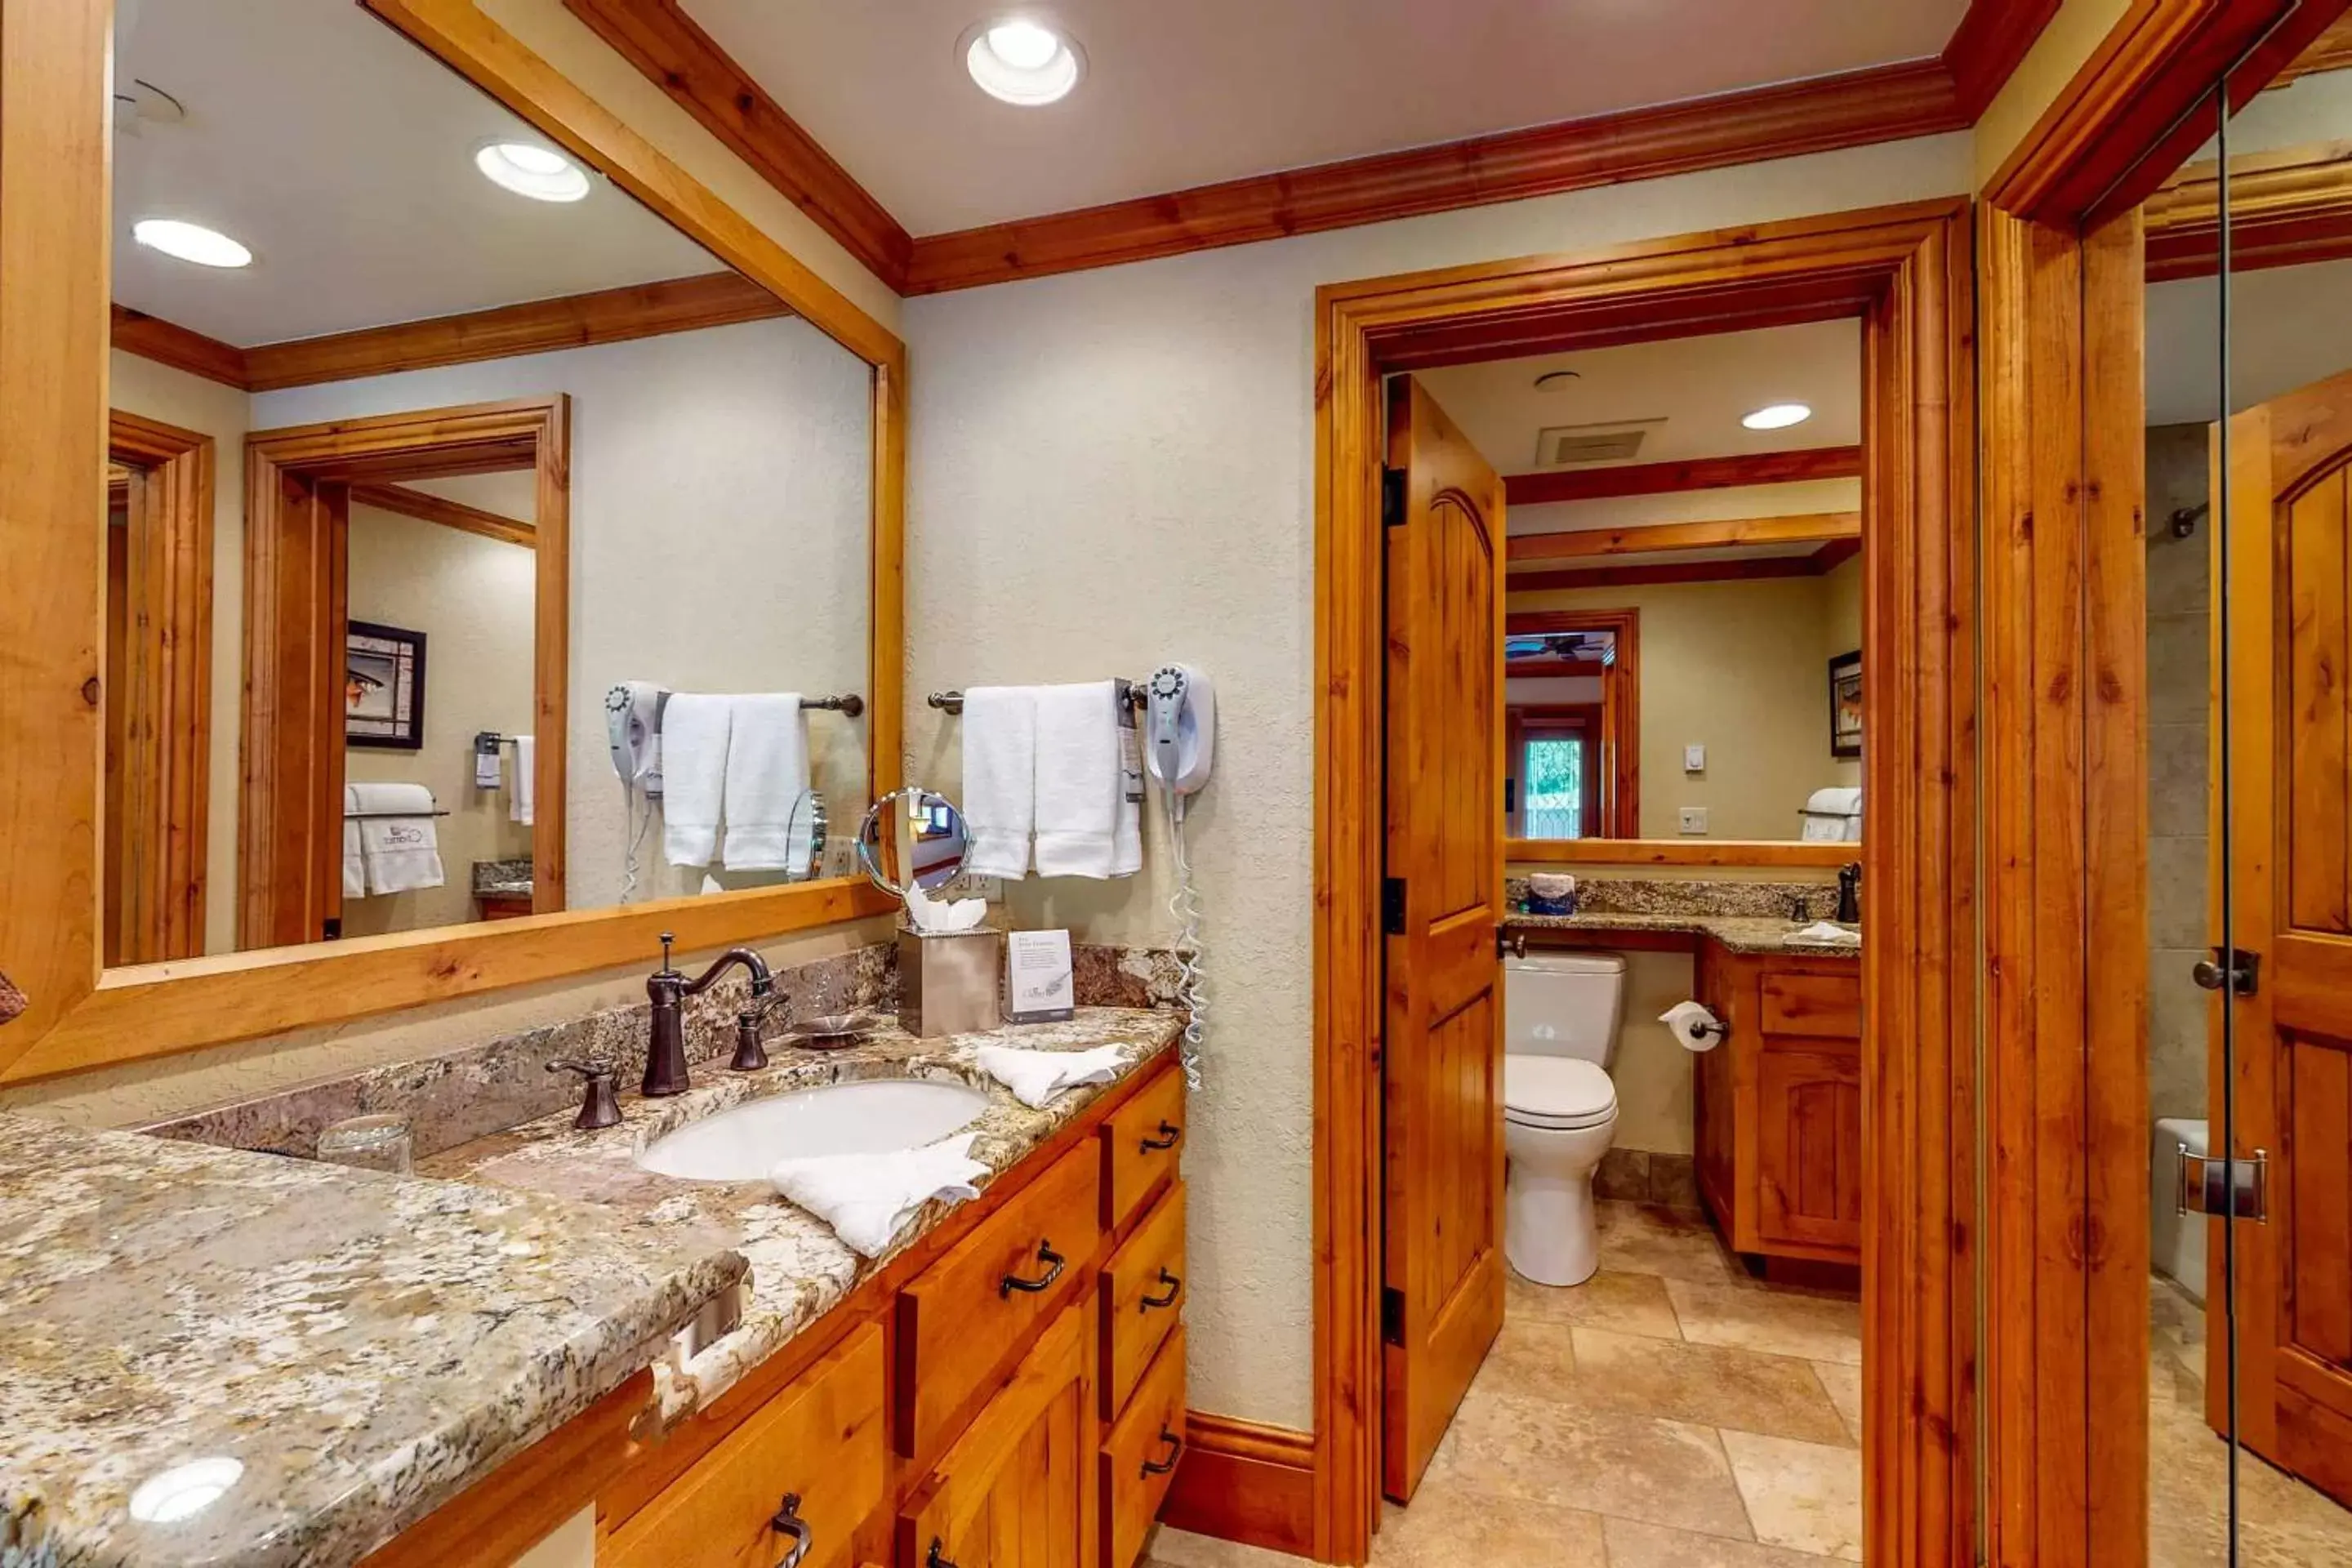 Bathroom in The Charter at Beaver Creek